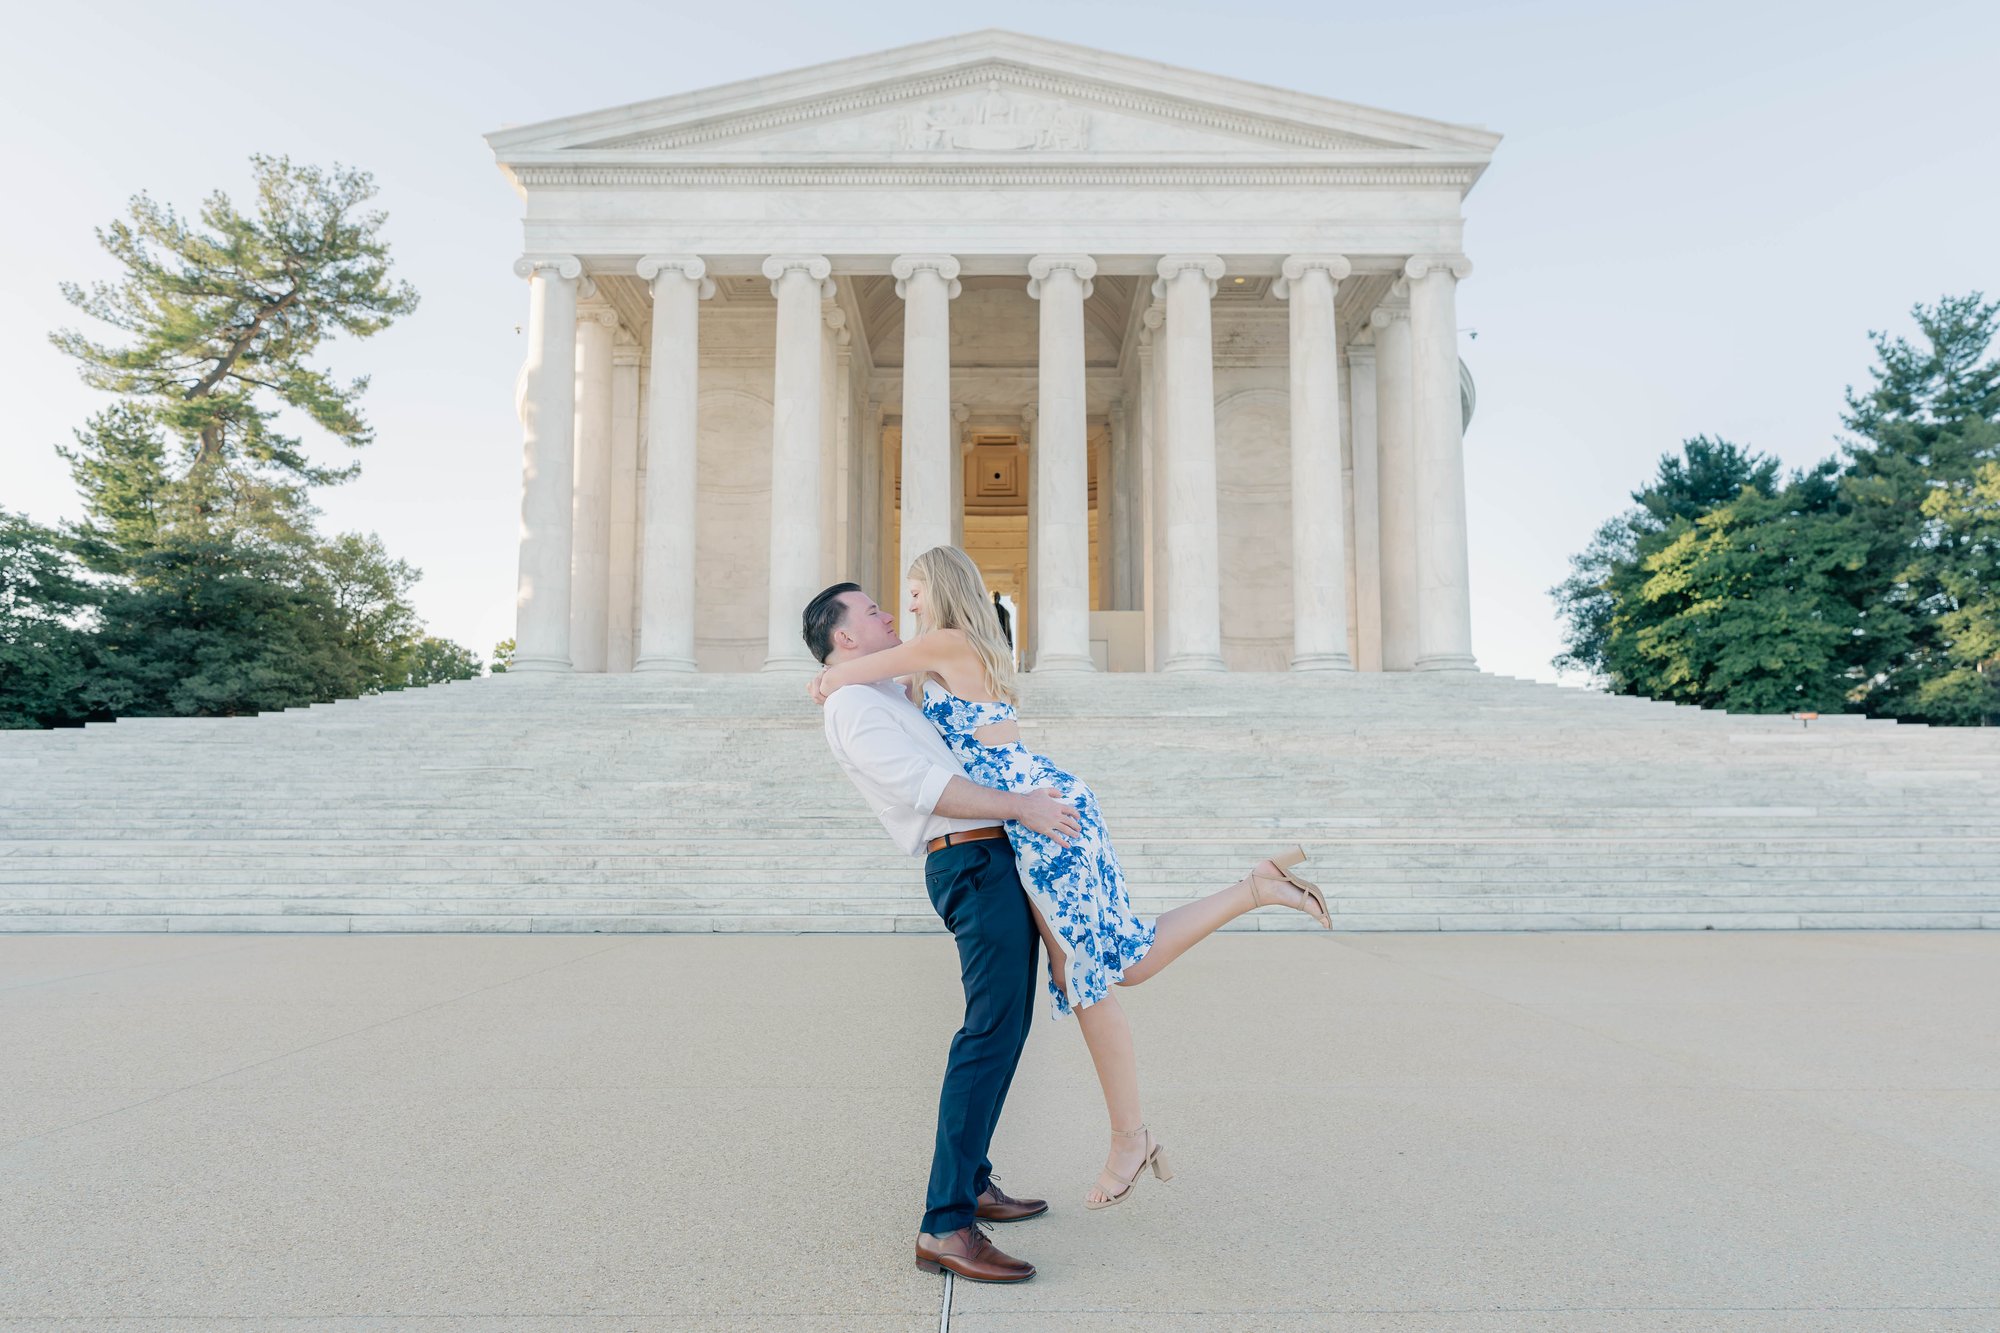 engagement photo of a couple in Washington, d.c. captured by stephanie grooms artistry